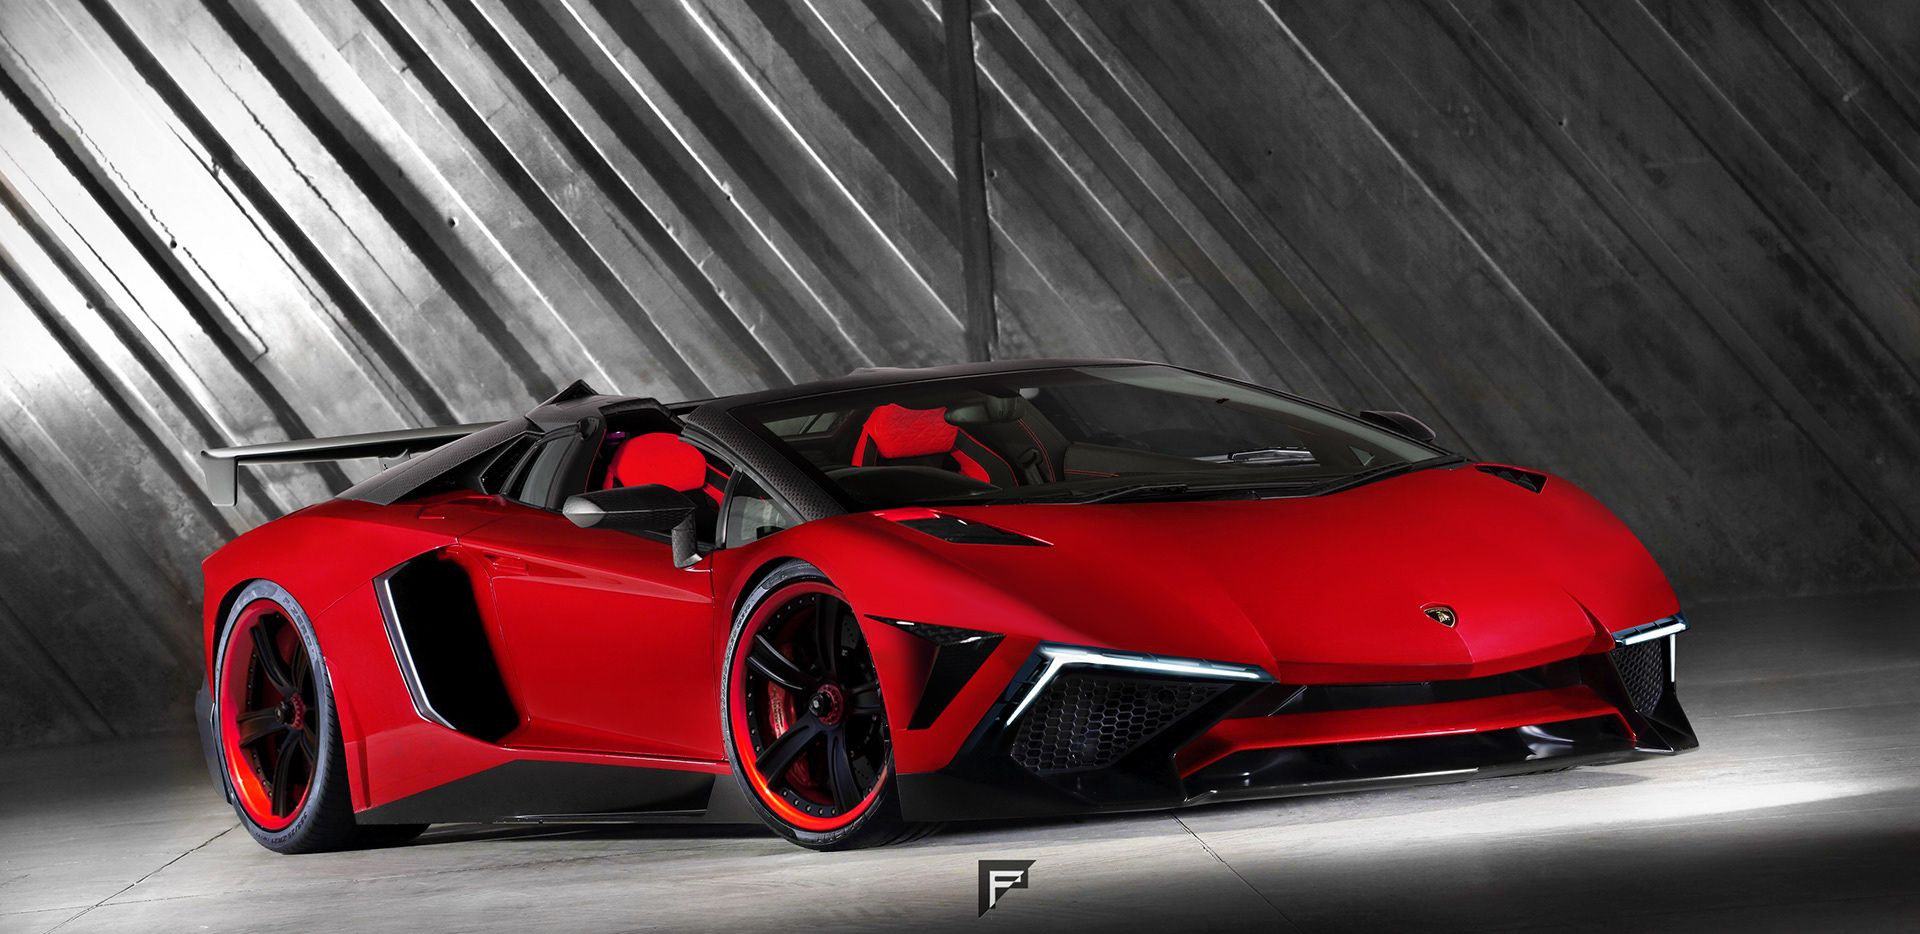 Lamborghini Aventador SV Is Infused With Terzo Millennio Styling | Carscoops